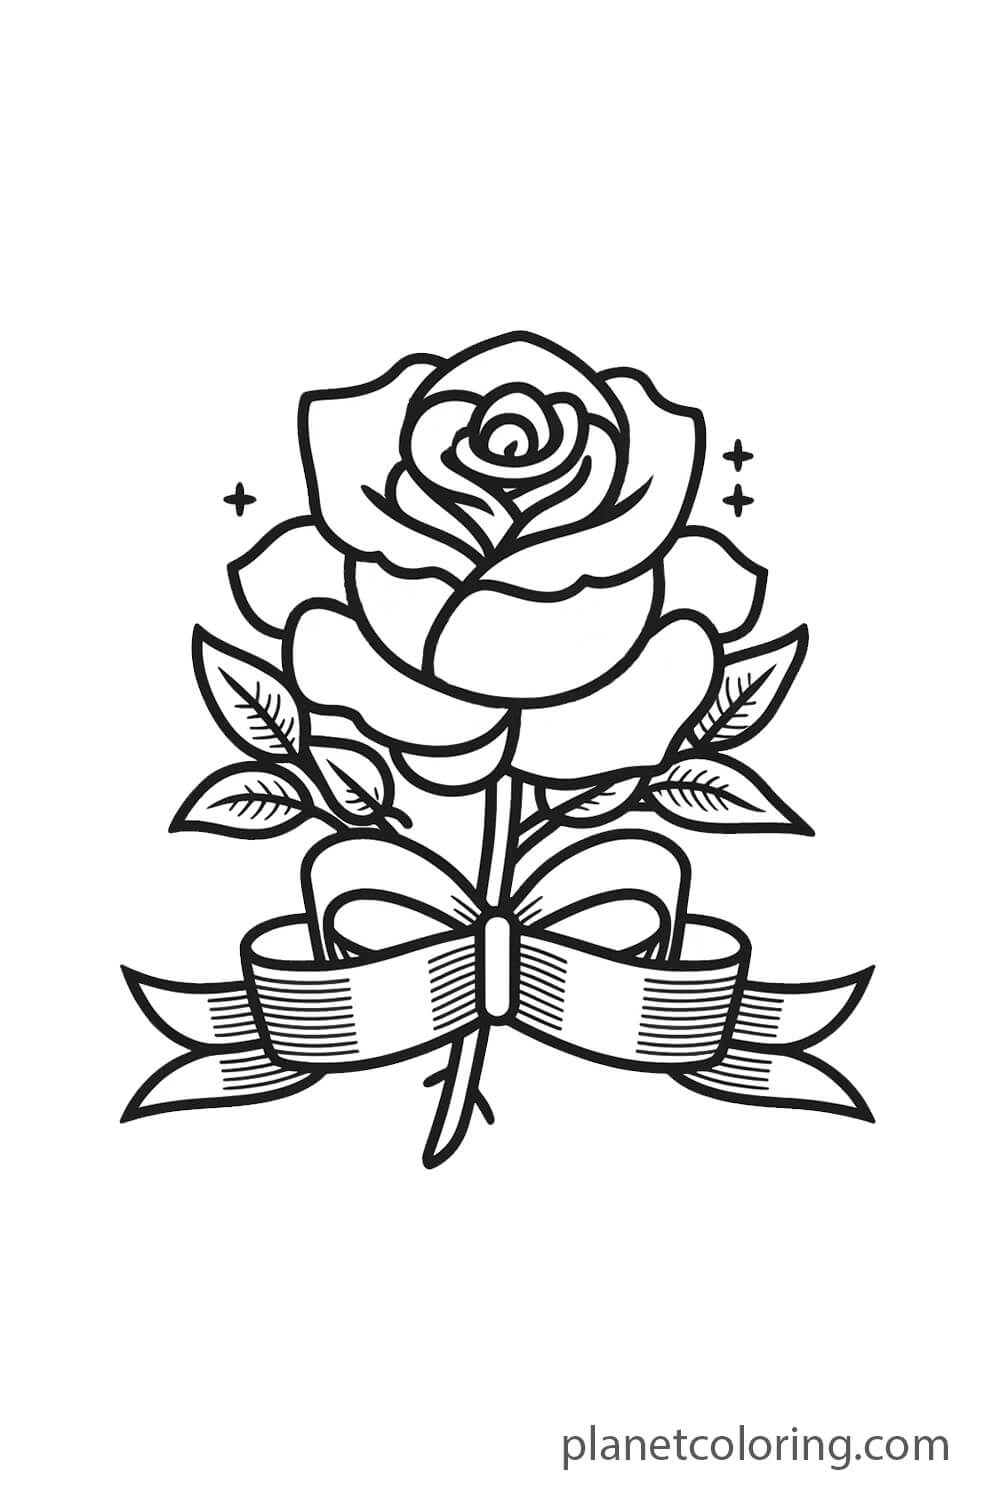 Rose with a ribbon